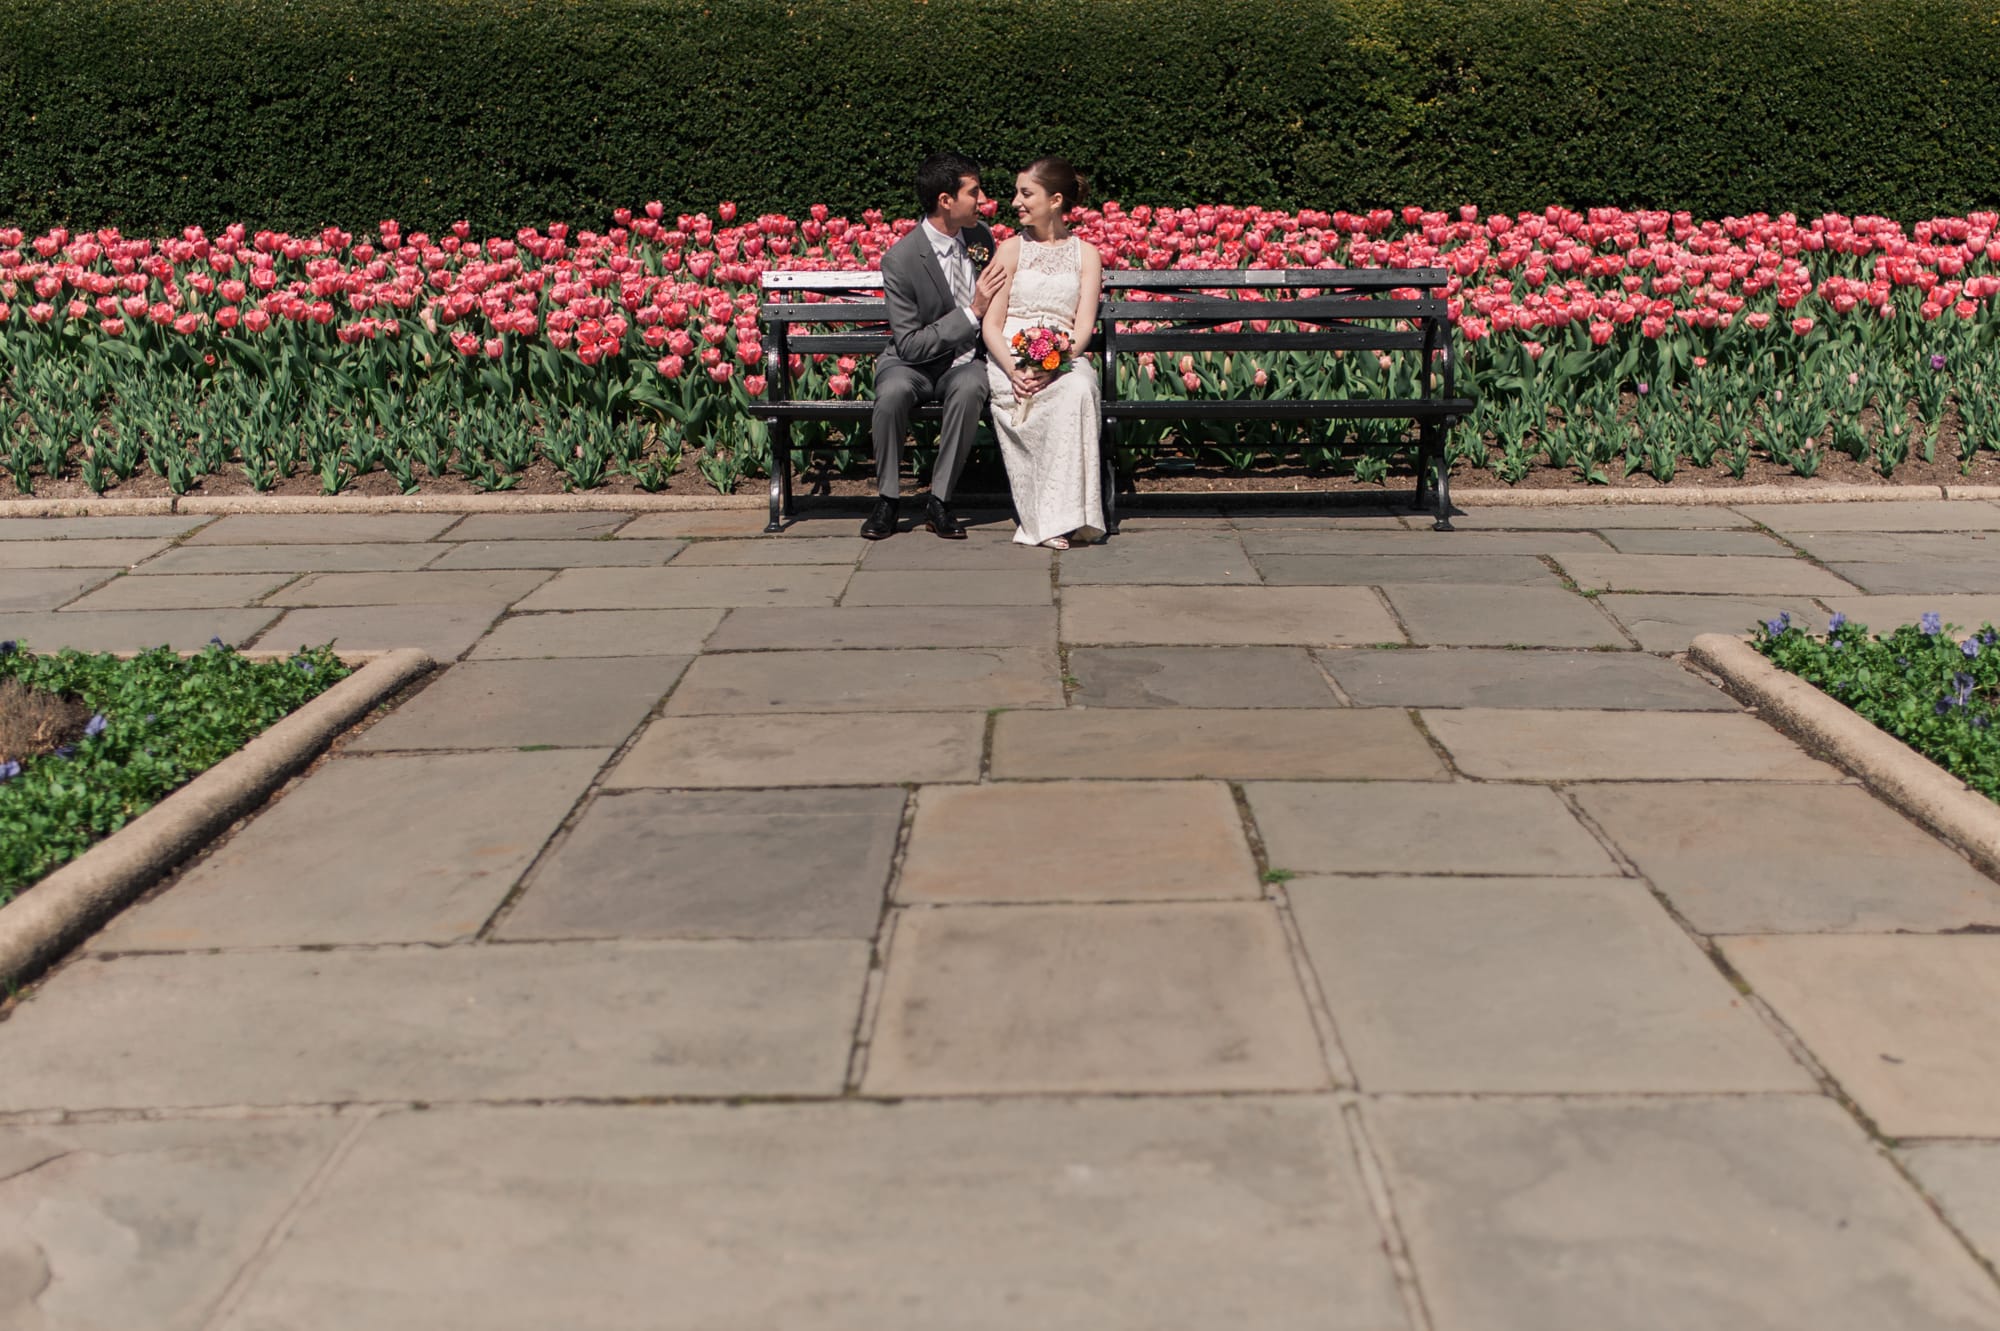 NYC Conservatory Gardens Elopement, NYC Elopement